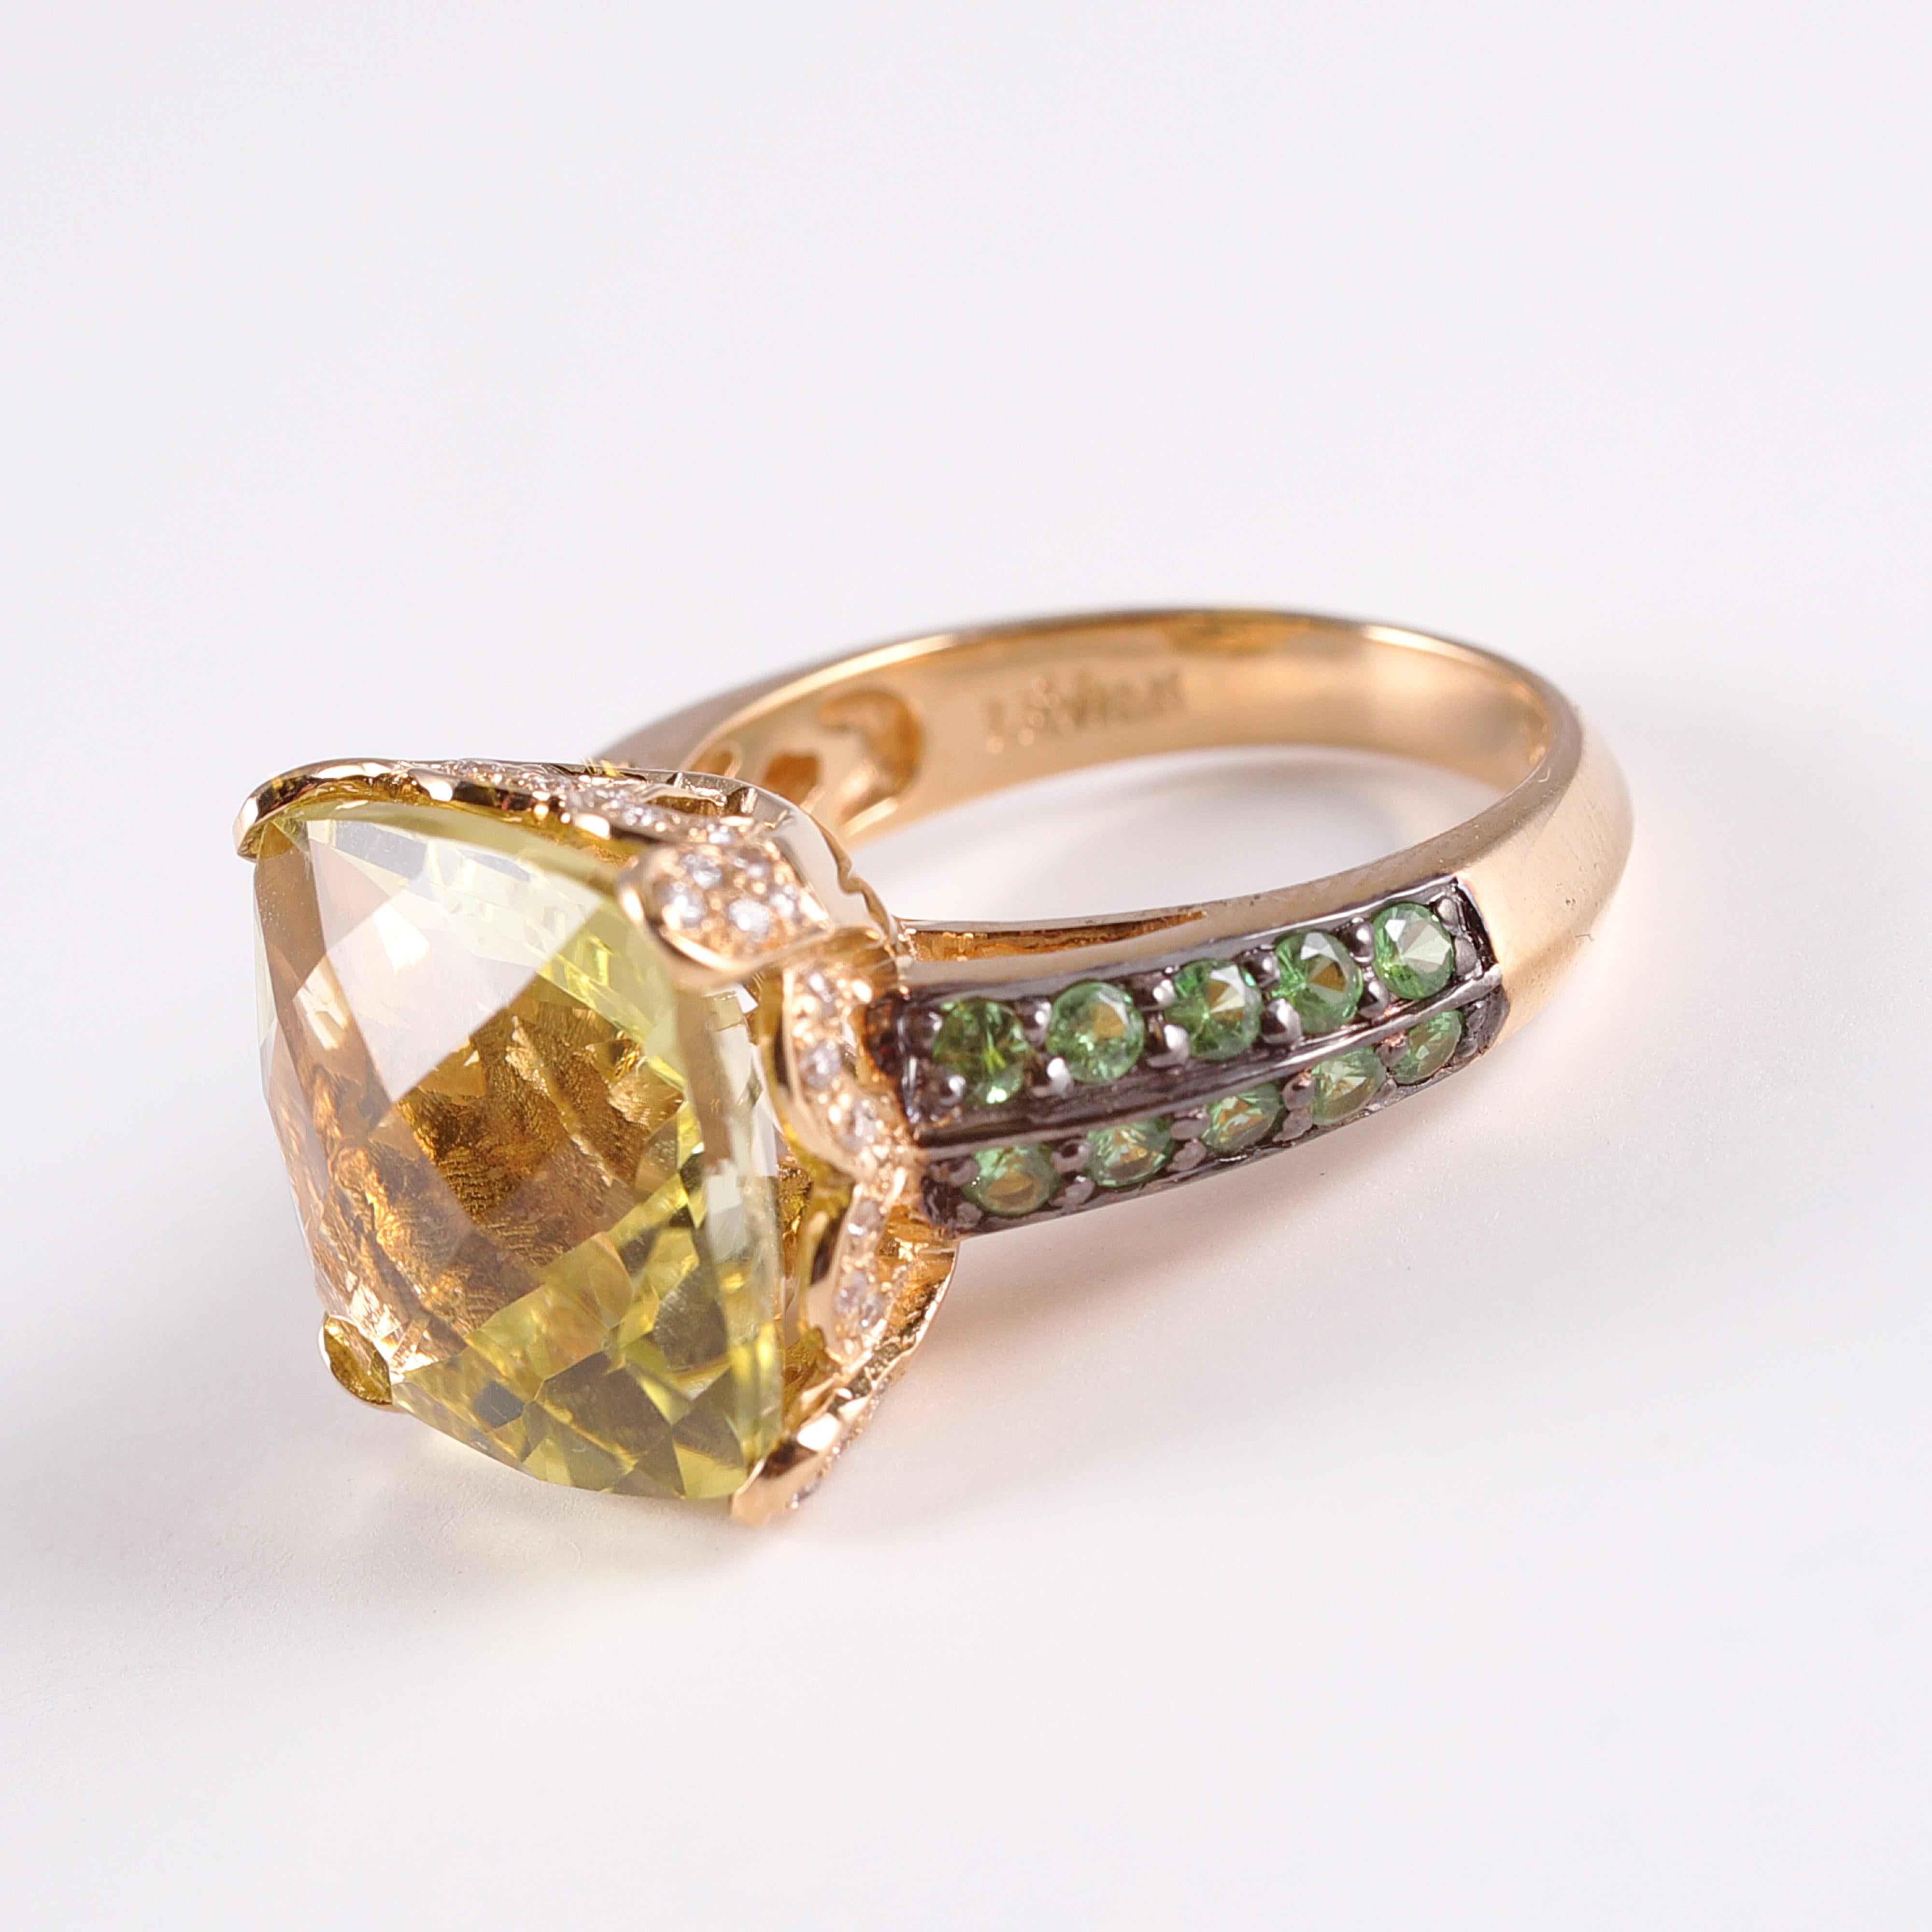 LeVian cushion cut citrine accented by tsavorites and diamonds set in 18 karat yellow gold. Size 7.